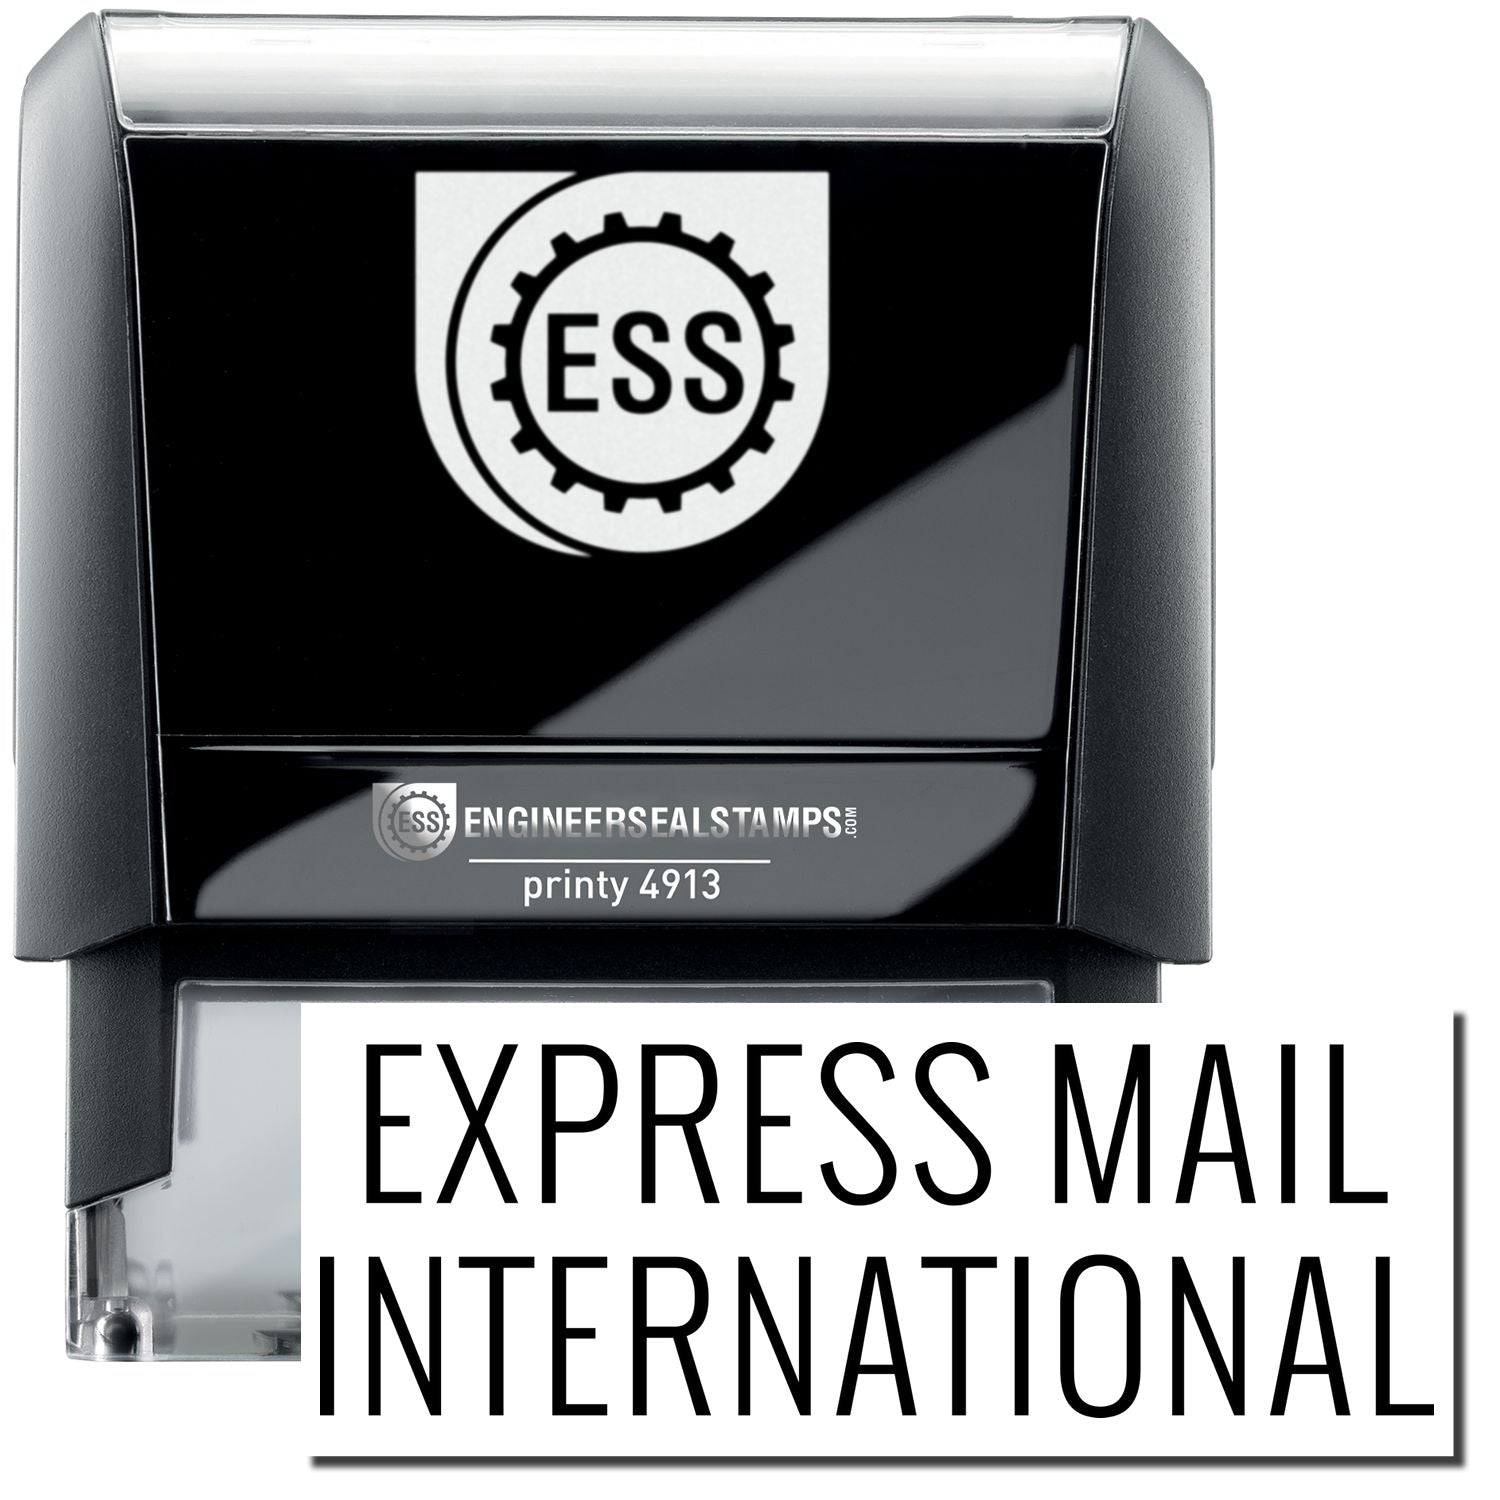 A self-inking stamp with a stamped image showing how the text "EXPRESS MAIL INTERNATIONAL" in a large font is displayed by it after stamping.